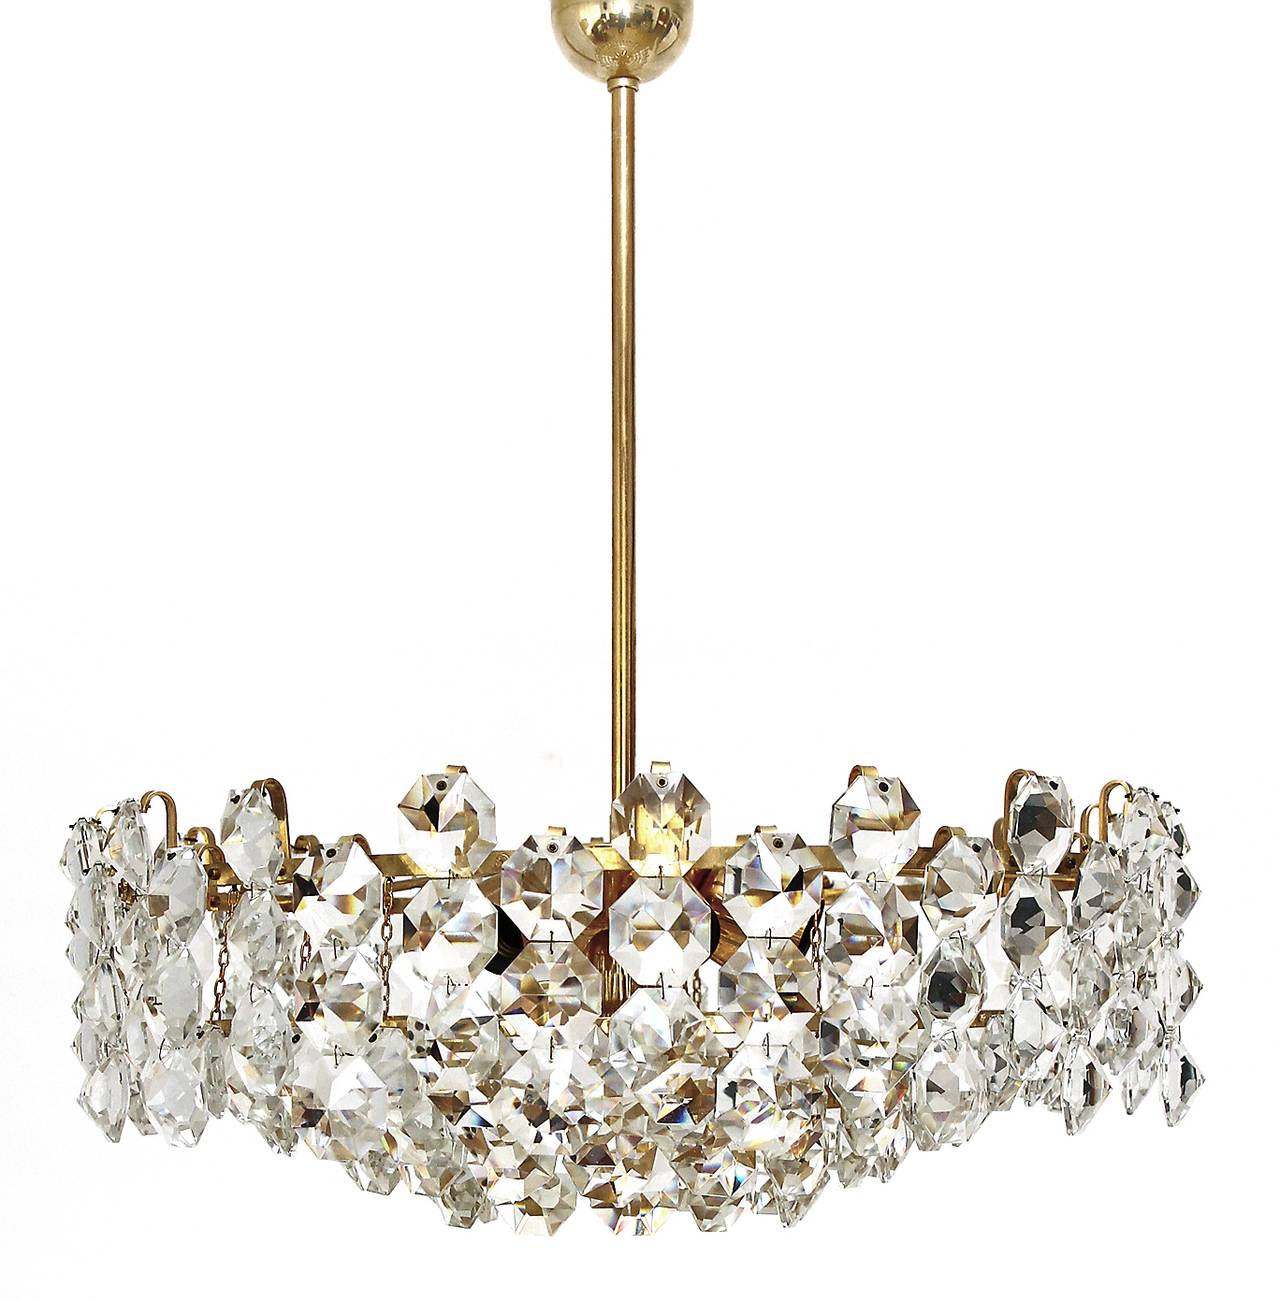 A large and very beautiful Austrian chandelier manufactured in Mid-Century in the 1960s. It is made of large cut crystal glass and a brass frame. Each crystal glass has the dimensions of 2.4 x 2.4 in. (6 x 6 cm). This kind of diamond shaped crystal